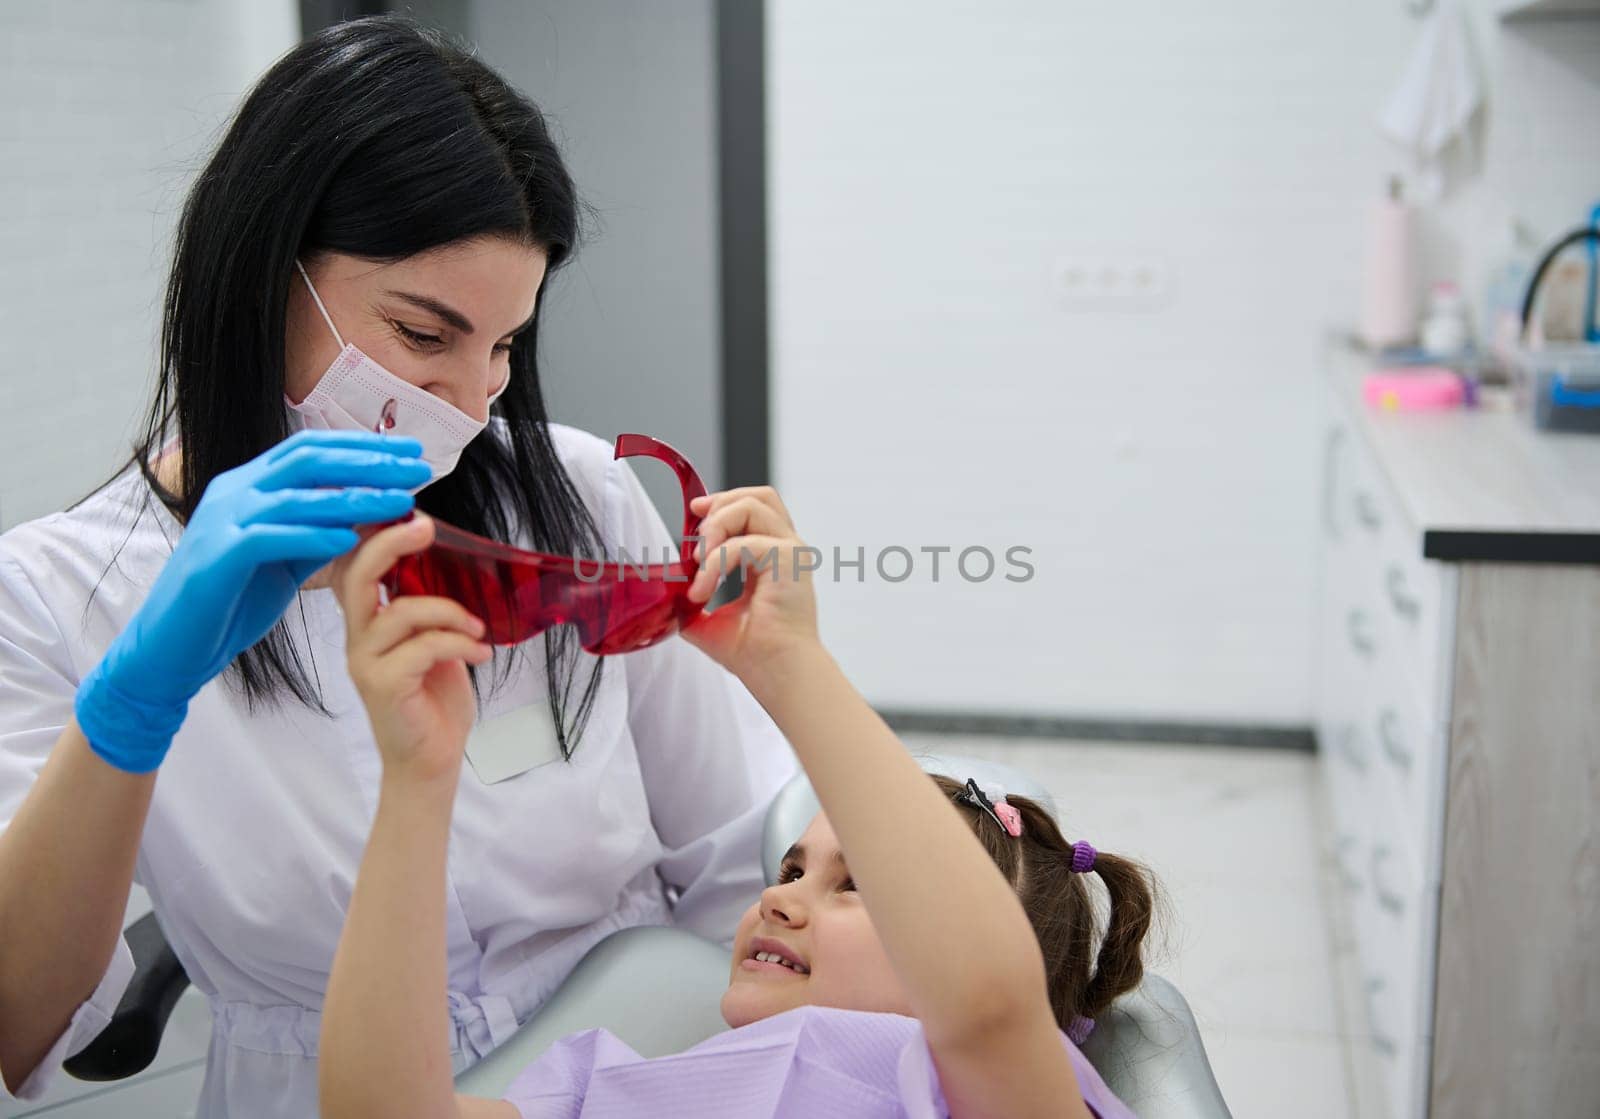 Pediatric dentistry. Dental practice. Pleasant female dentist doctor talking to a little patient before dental check up. Oral health and hygiene. The concept of baby teeth treatment. Caries prevention